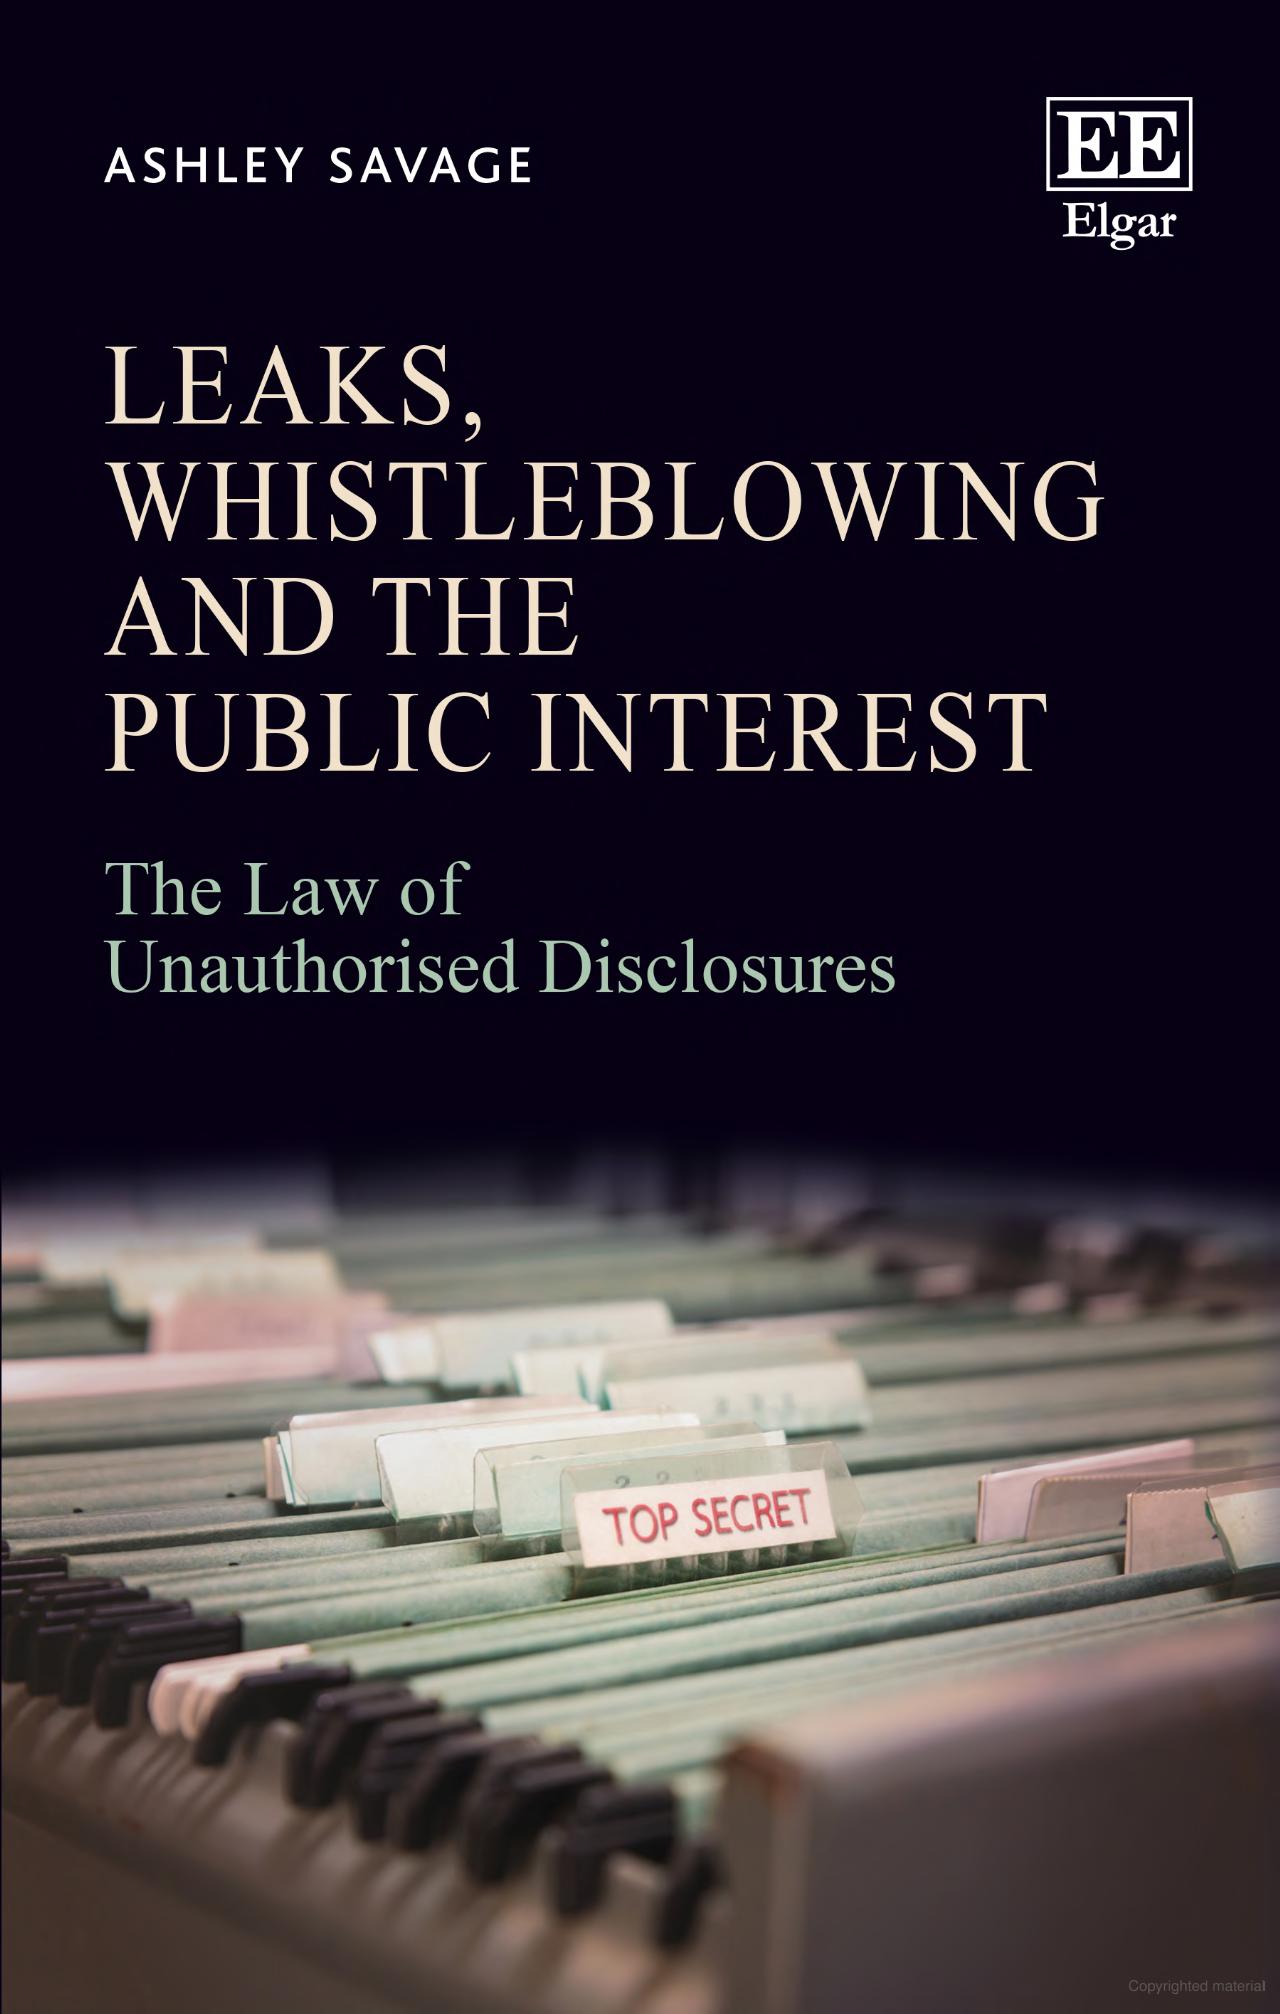 Leaks, whistleblowing and the public interest the law of unauthorised disclosures